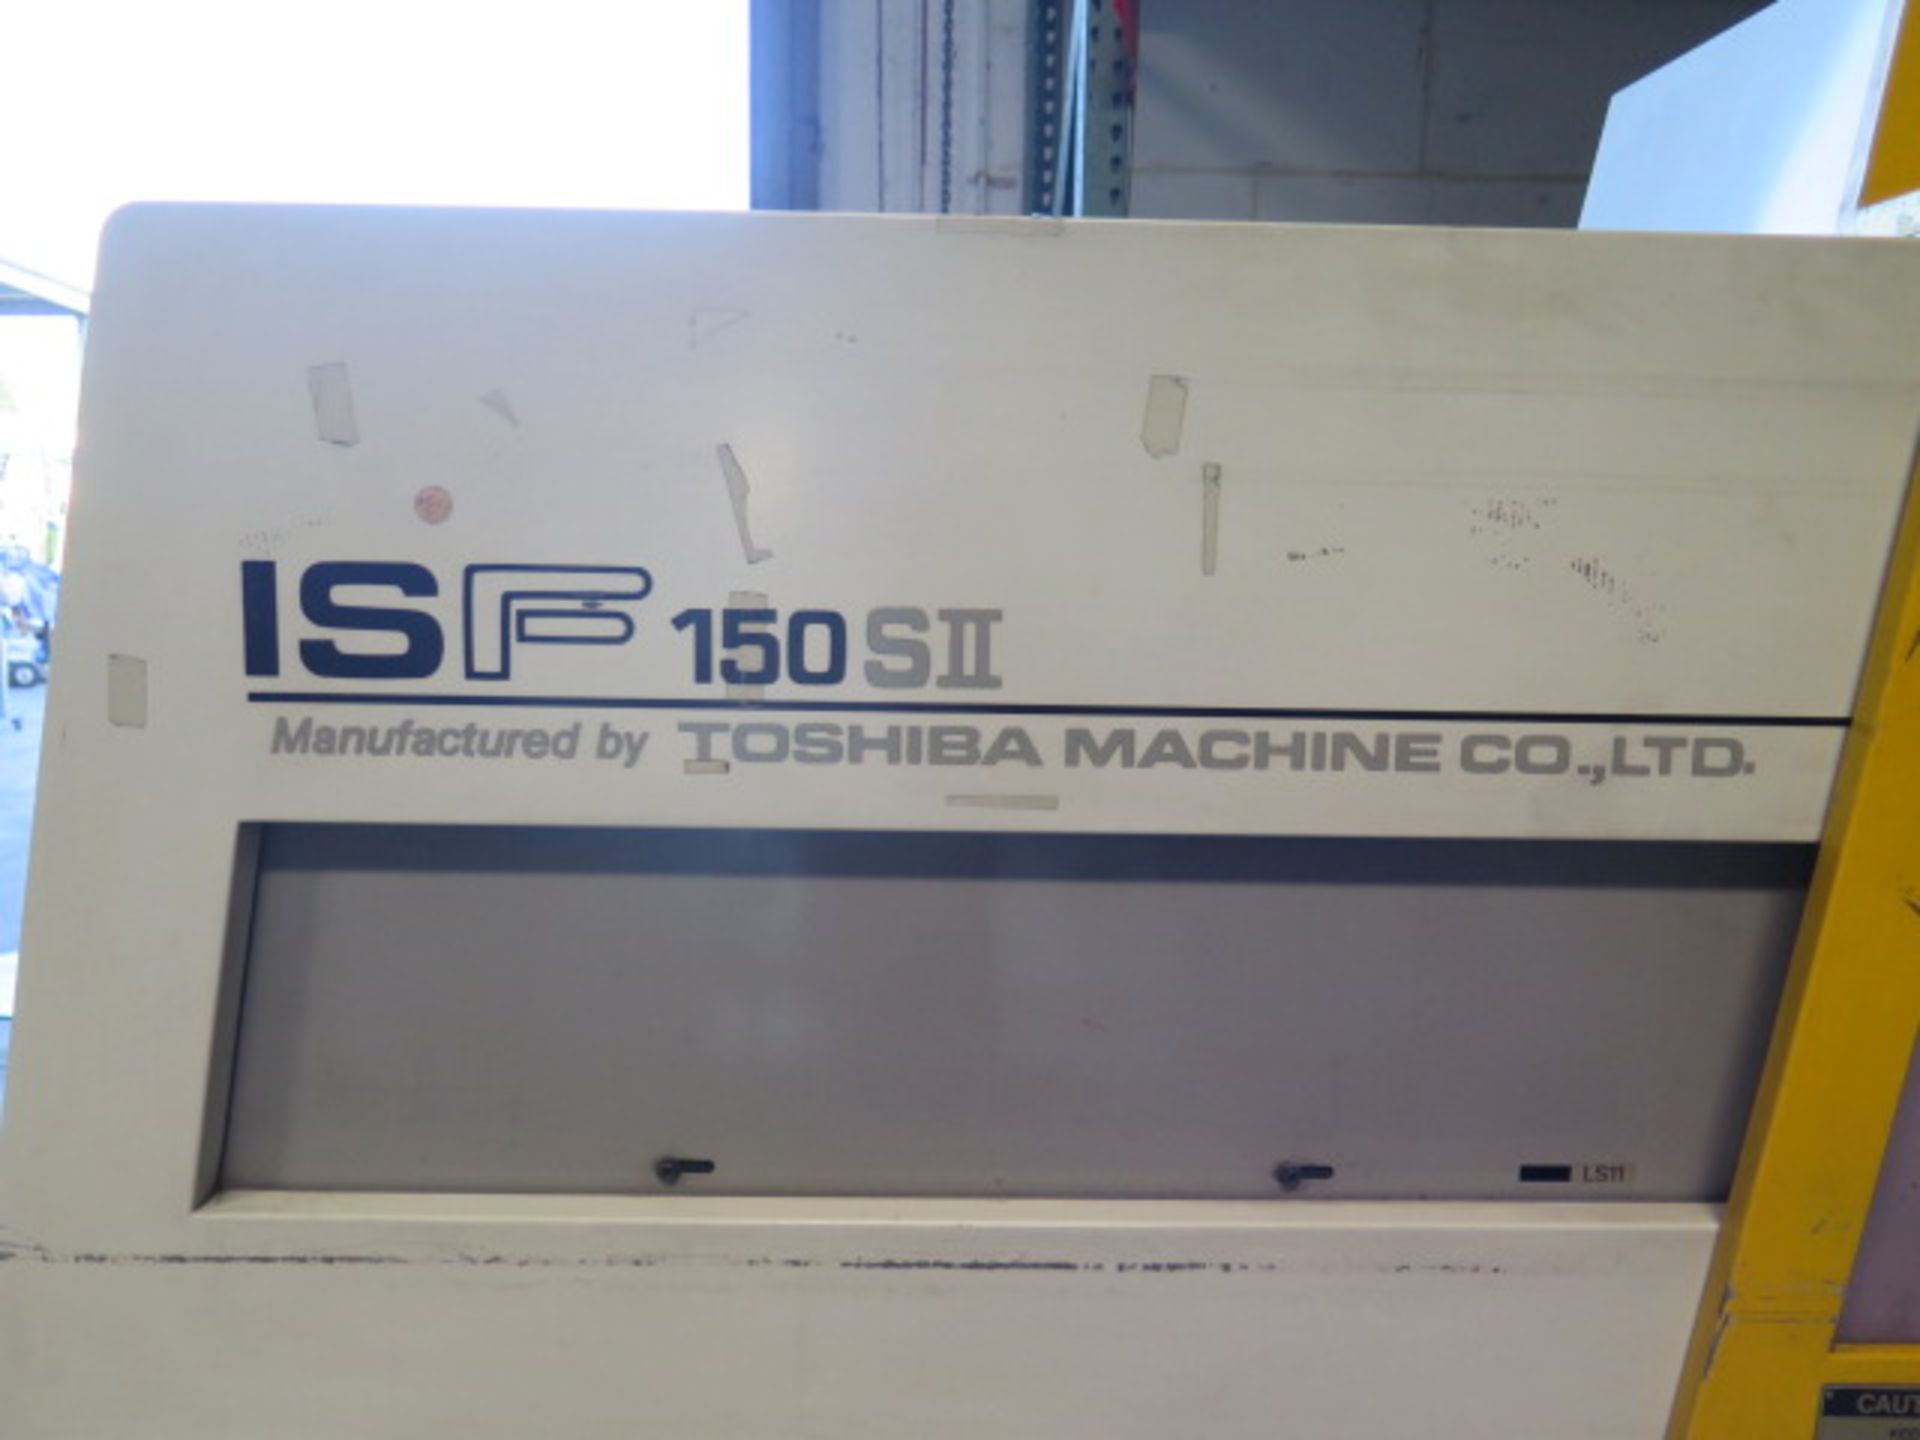 1994 Toshiba ISF150C II-5B 150 Ton Plastic Injec Molding s/n 480710 w/ Toshiba Controls, SOLD AS IS - Image 17 of 18